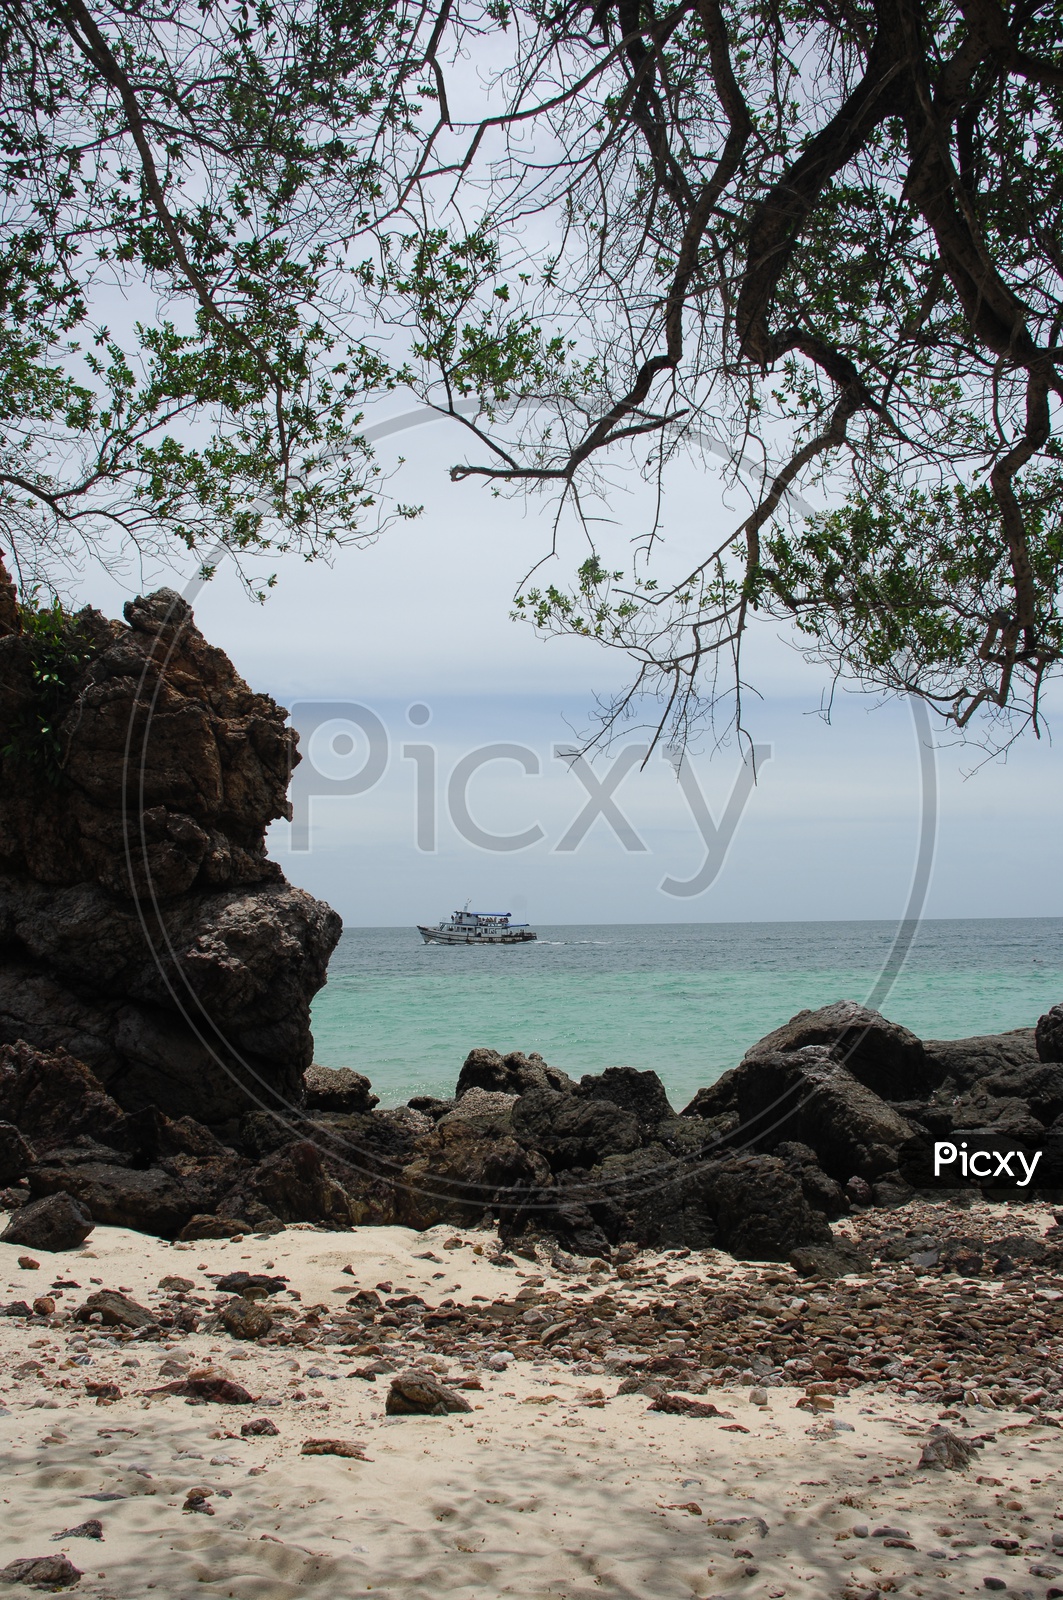 A boat seen at a distance in a beach through the rocks